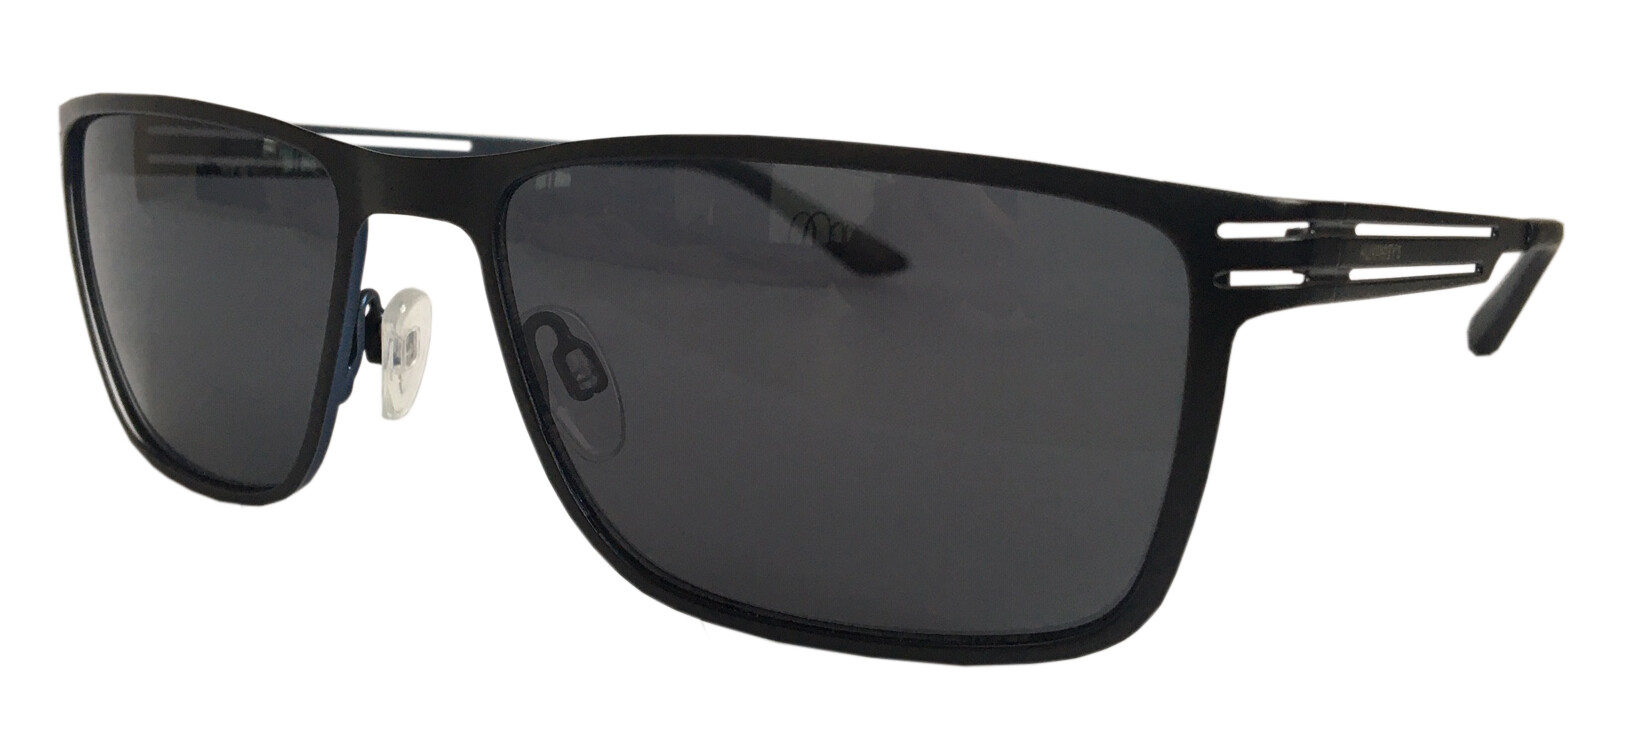 [products.image.front] HUMPHREY´S eyewear 585187 17 Sonnenbrille